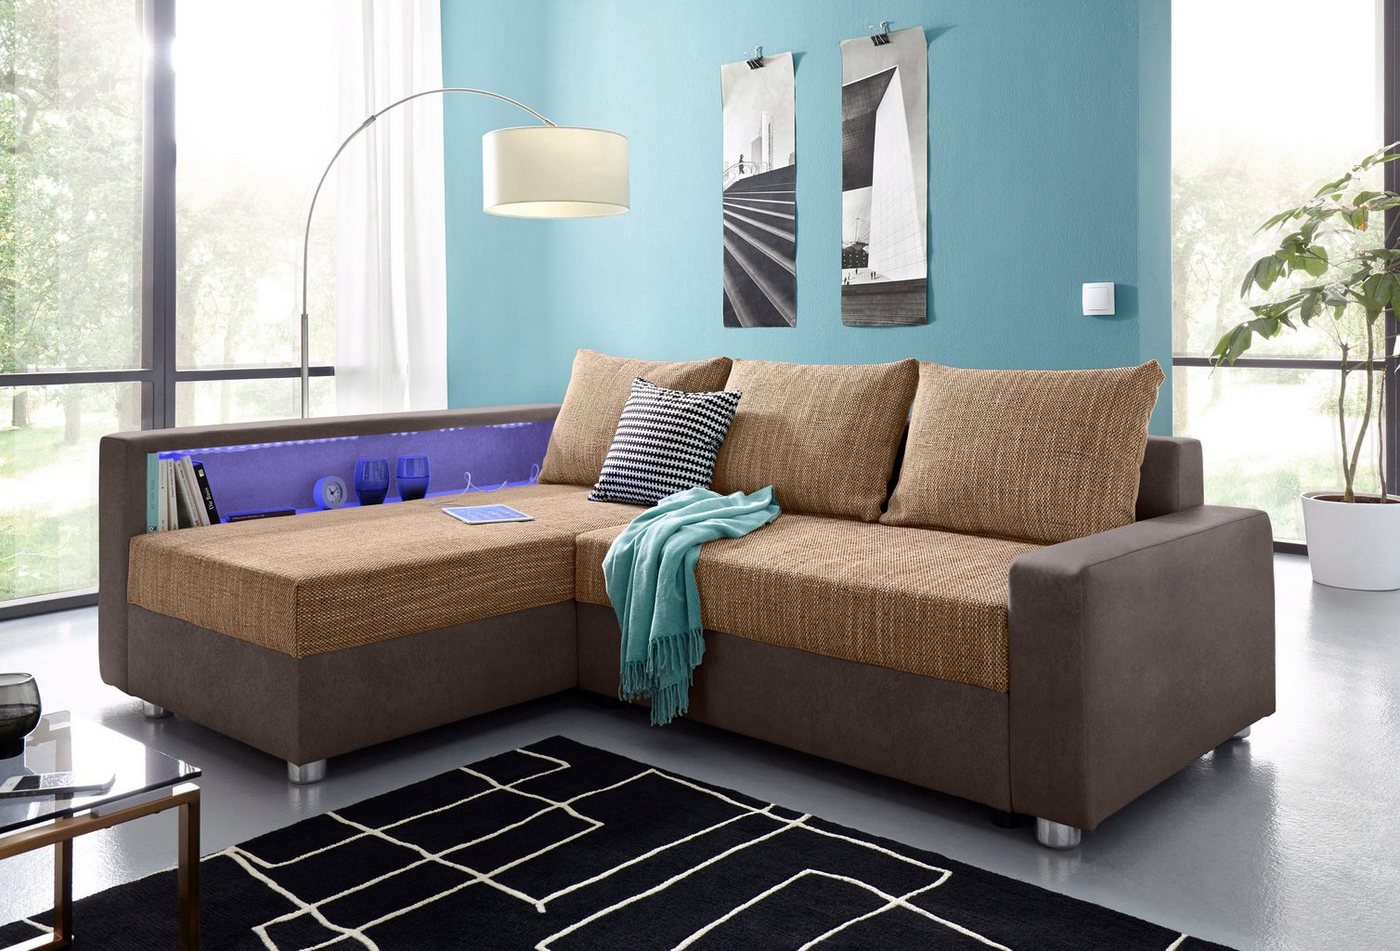 COLLECTION AB Ecksofa Relax, inklusive Bettfunktion, Federkern, wahlweise mit RGB-LED-Beleuchtung von COLLECTION AB